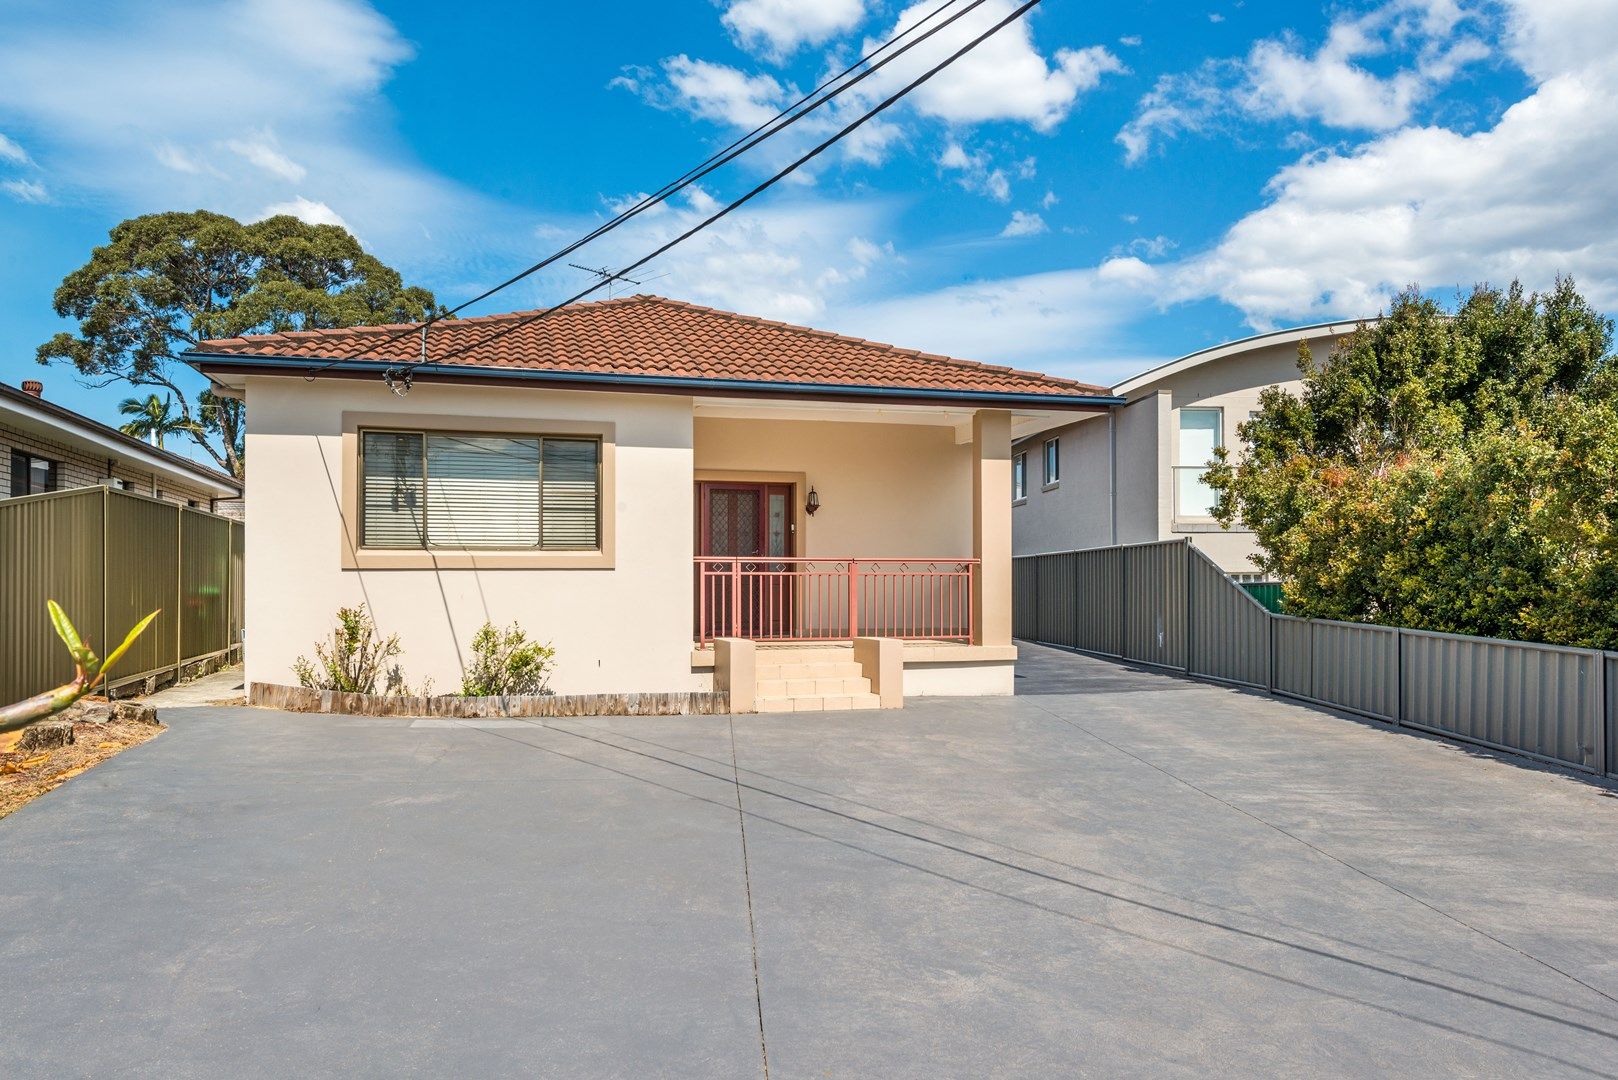 190 Connells Point Rd, Connells Point NSW 2221, Image 1